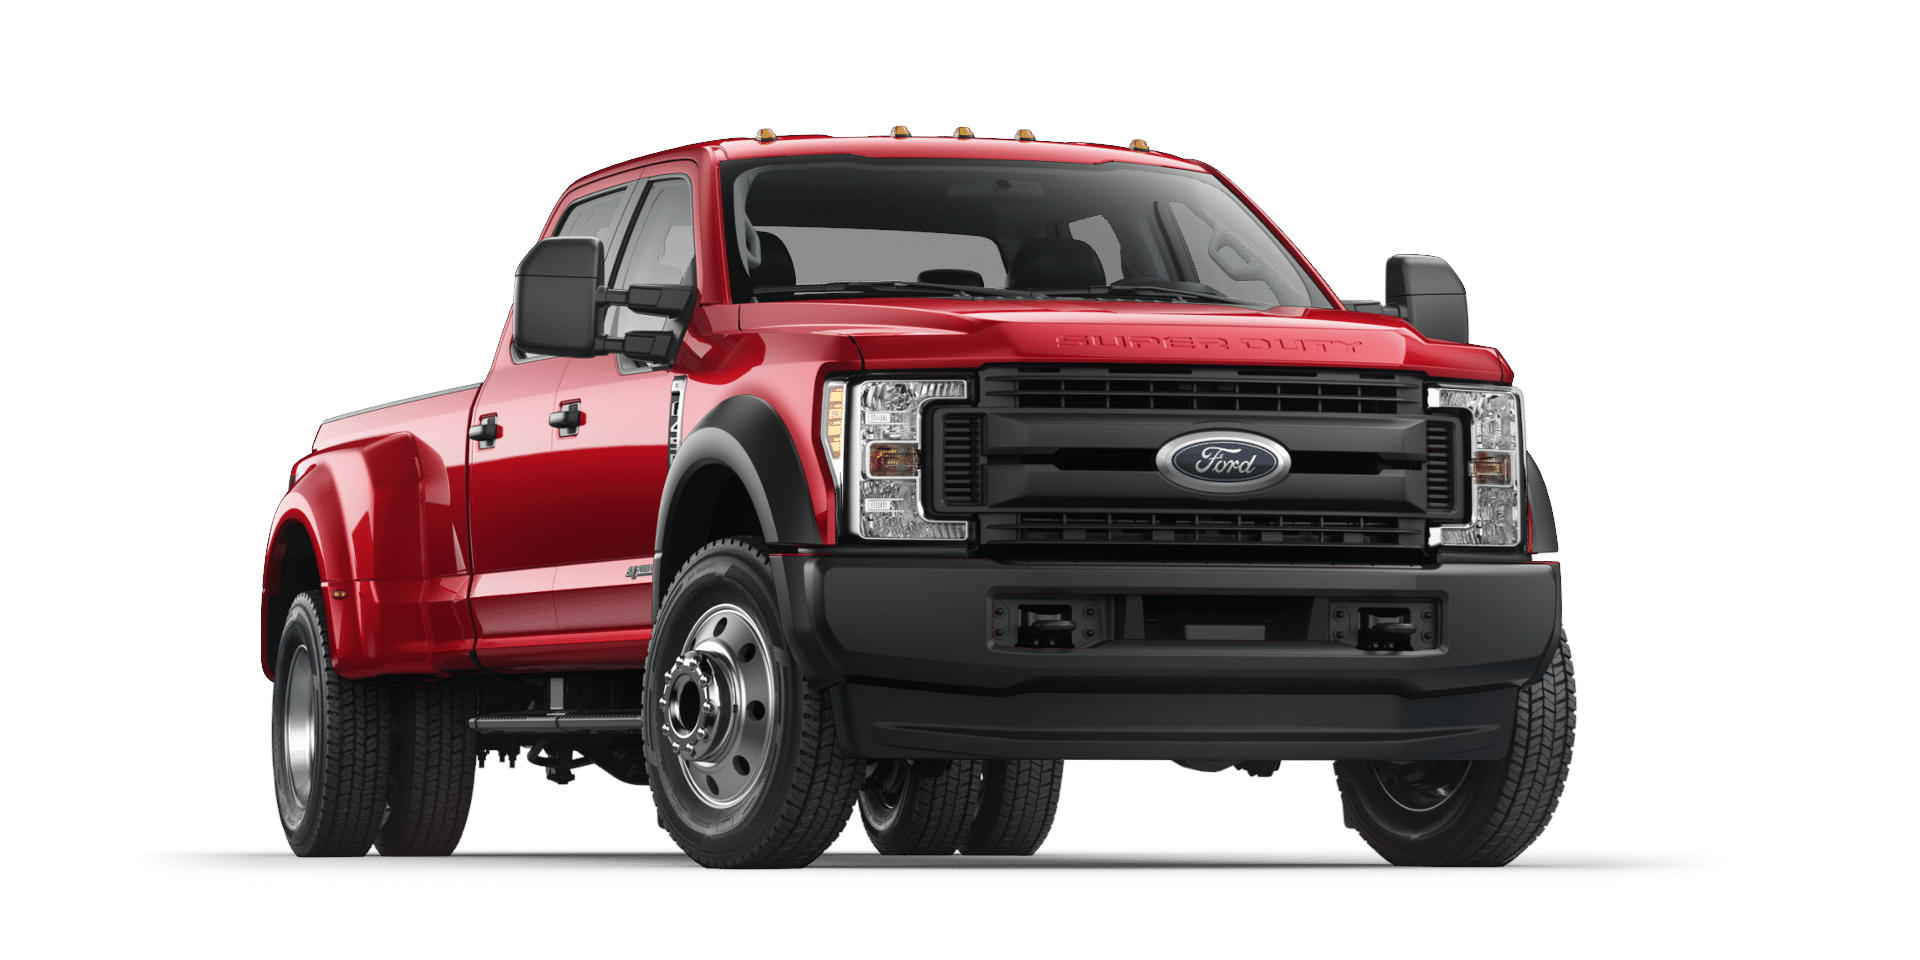 2019 Ford F-450 Super Duty Platinum Full Specs, Features and Price | CarBuzz